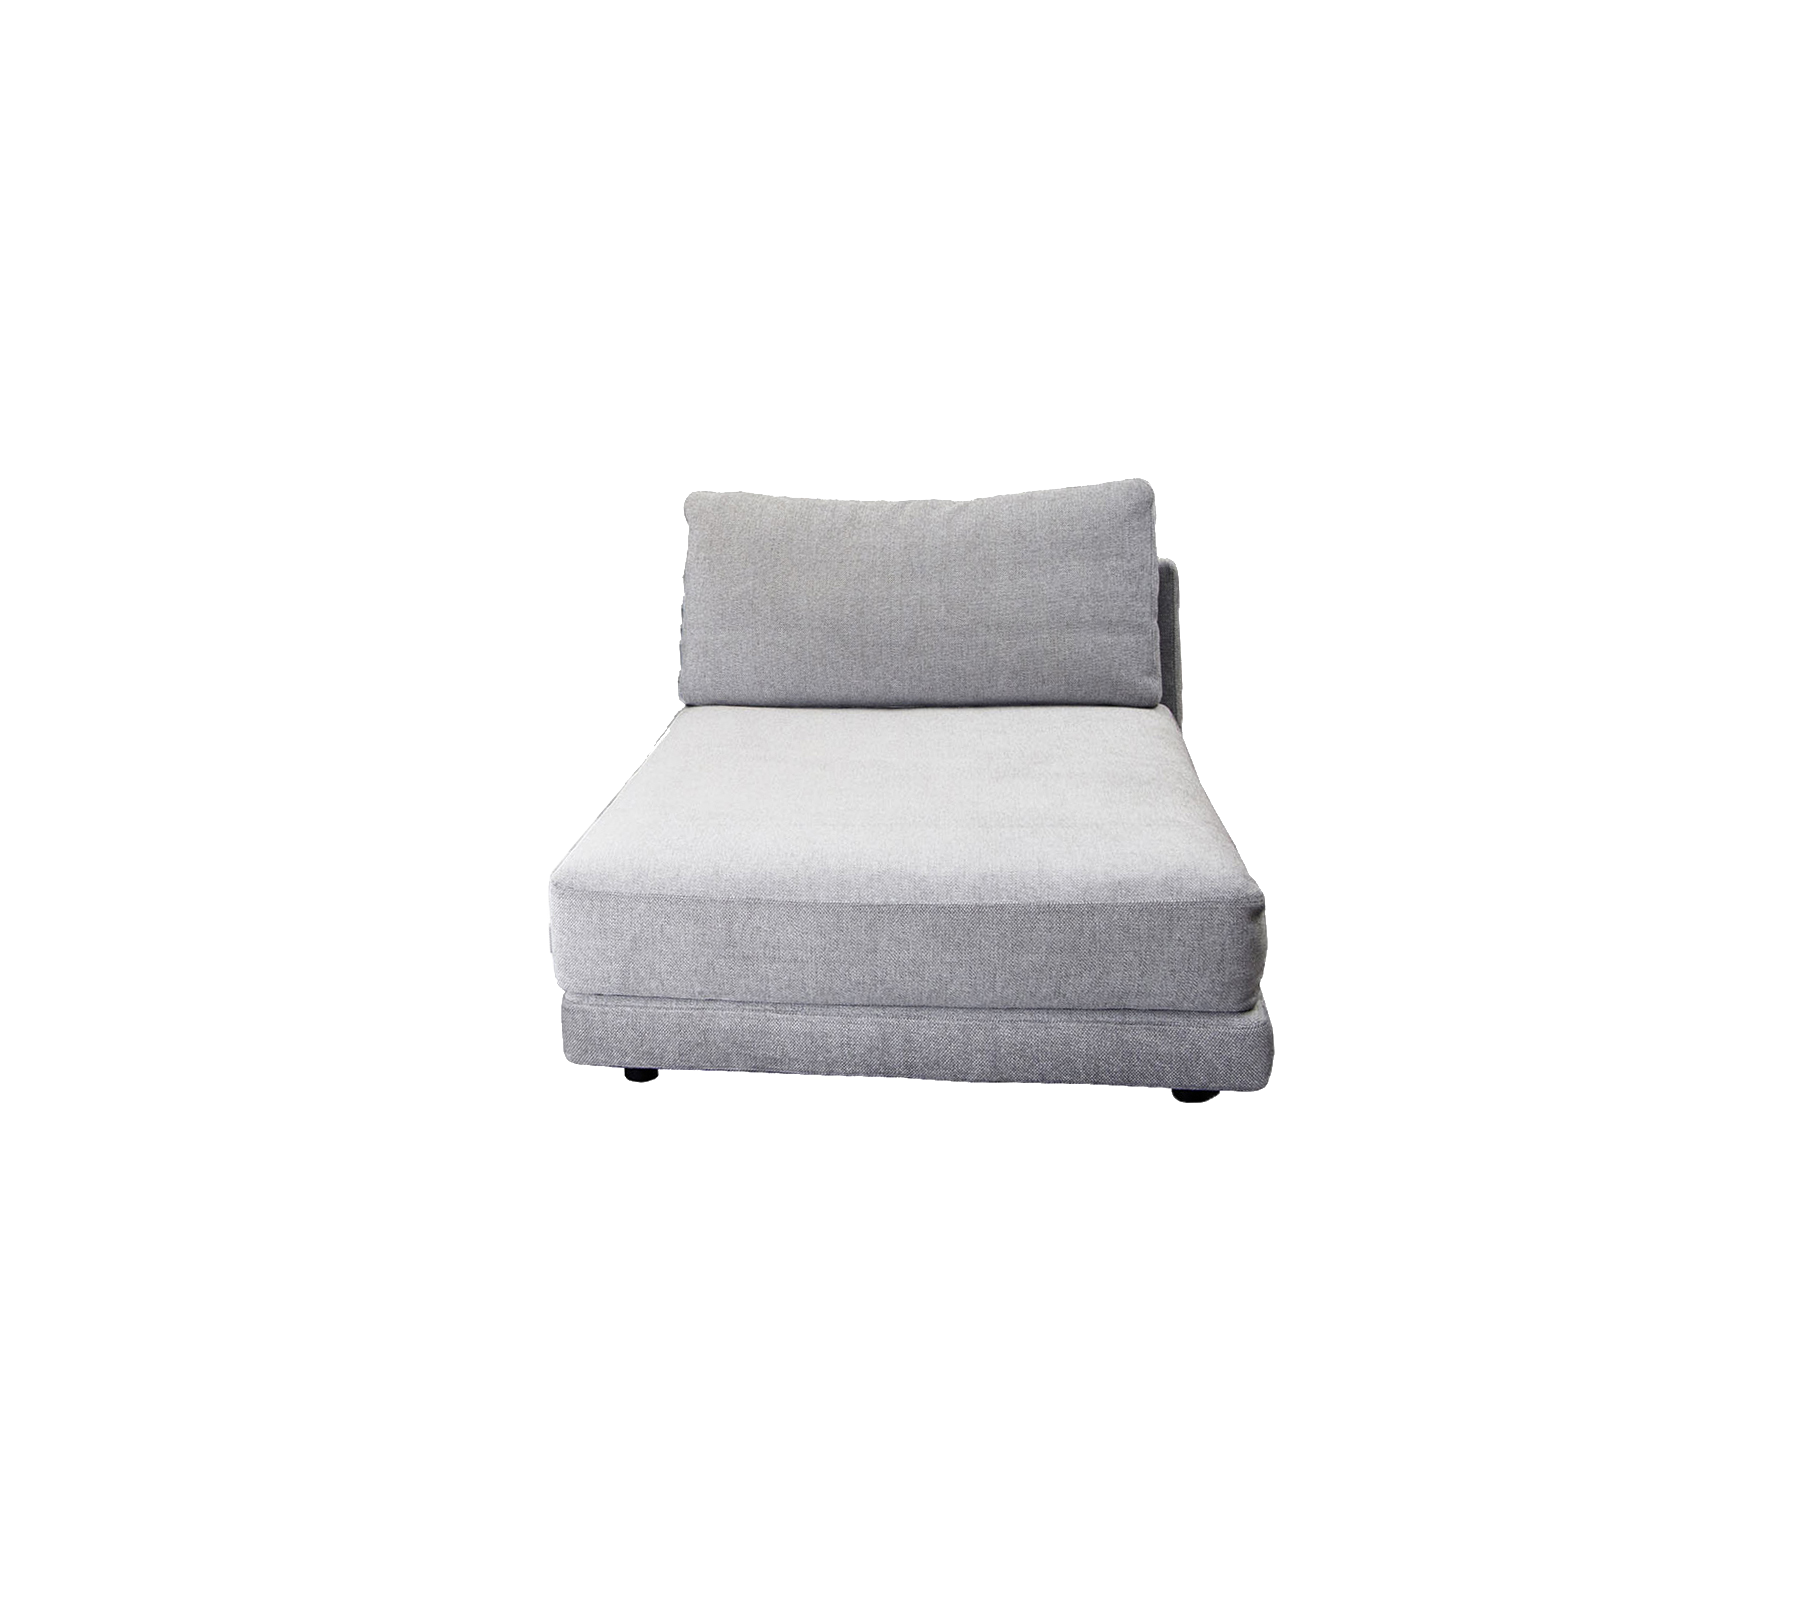 Scale single daybed module